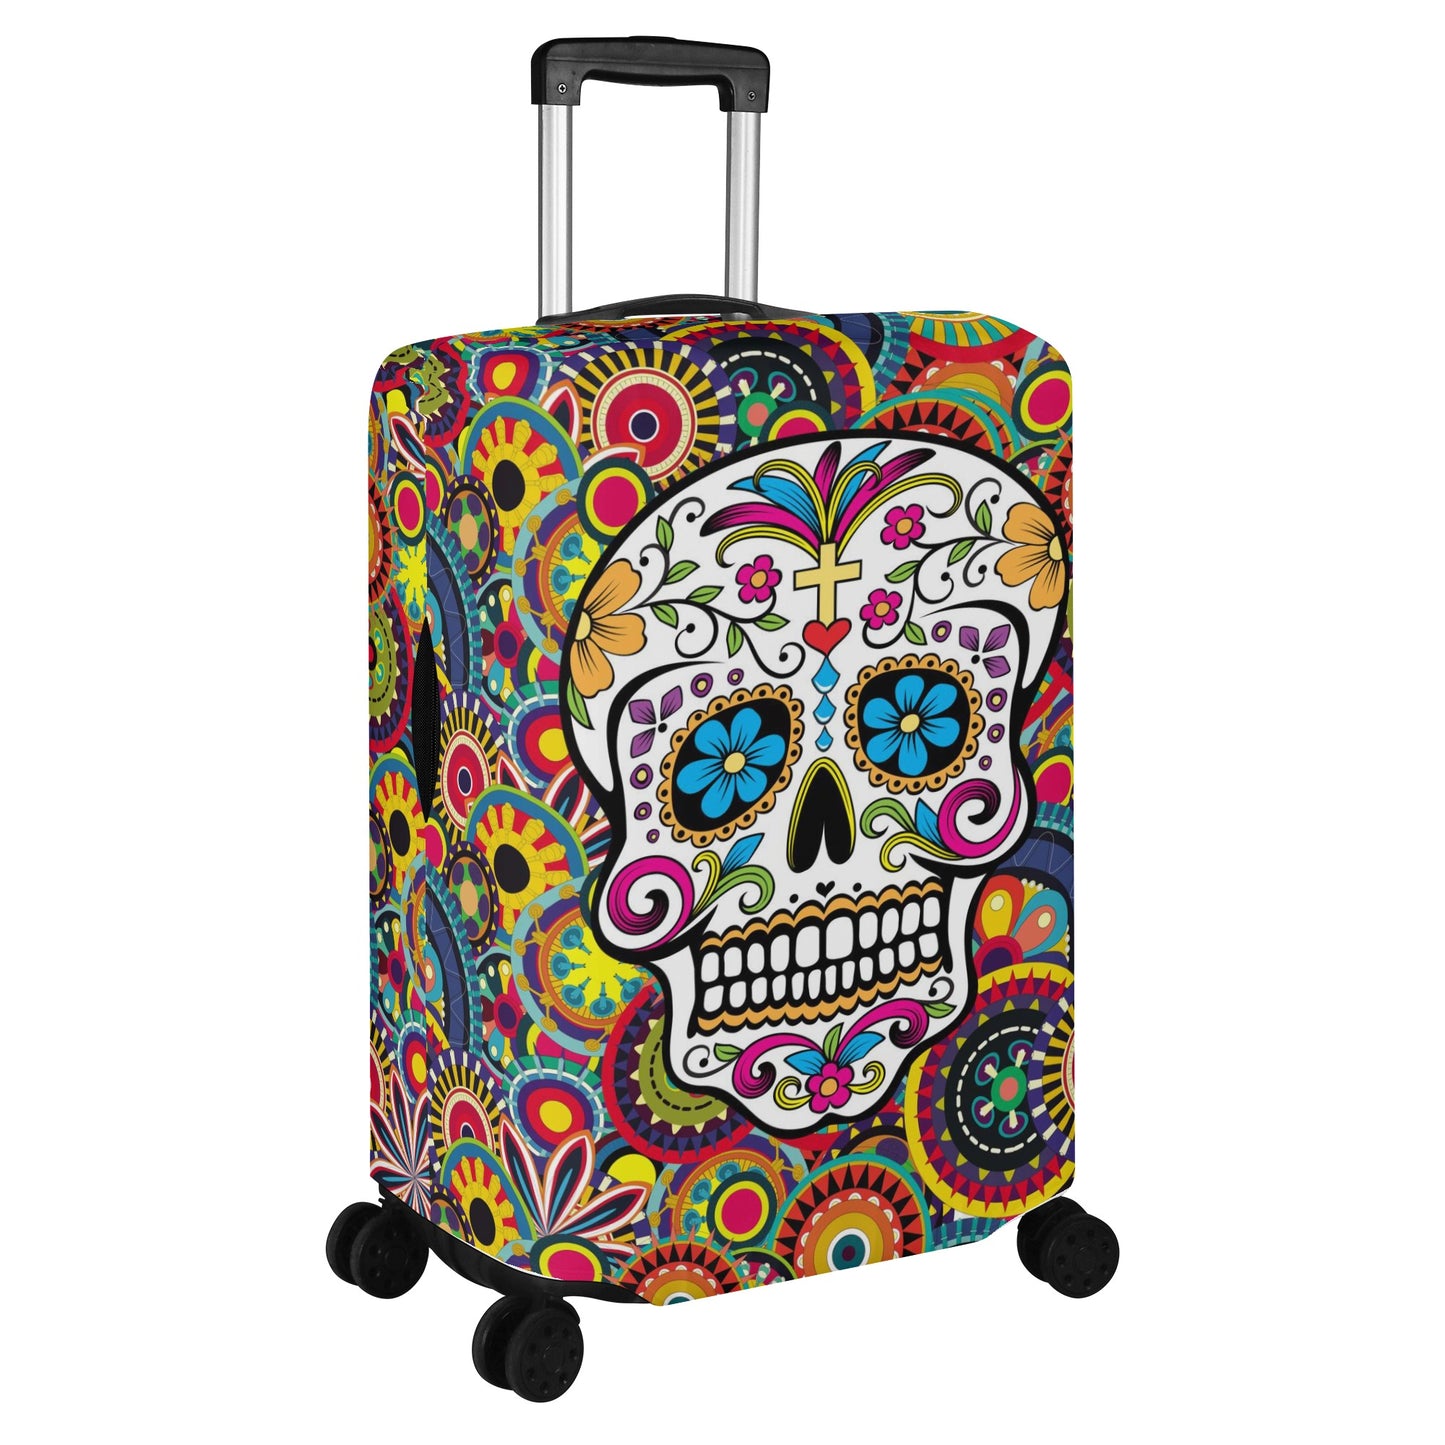 Floral sugar skull pattern Polyester Luggage Cover